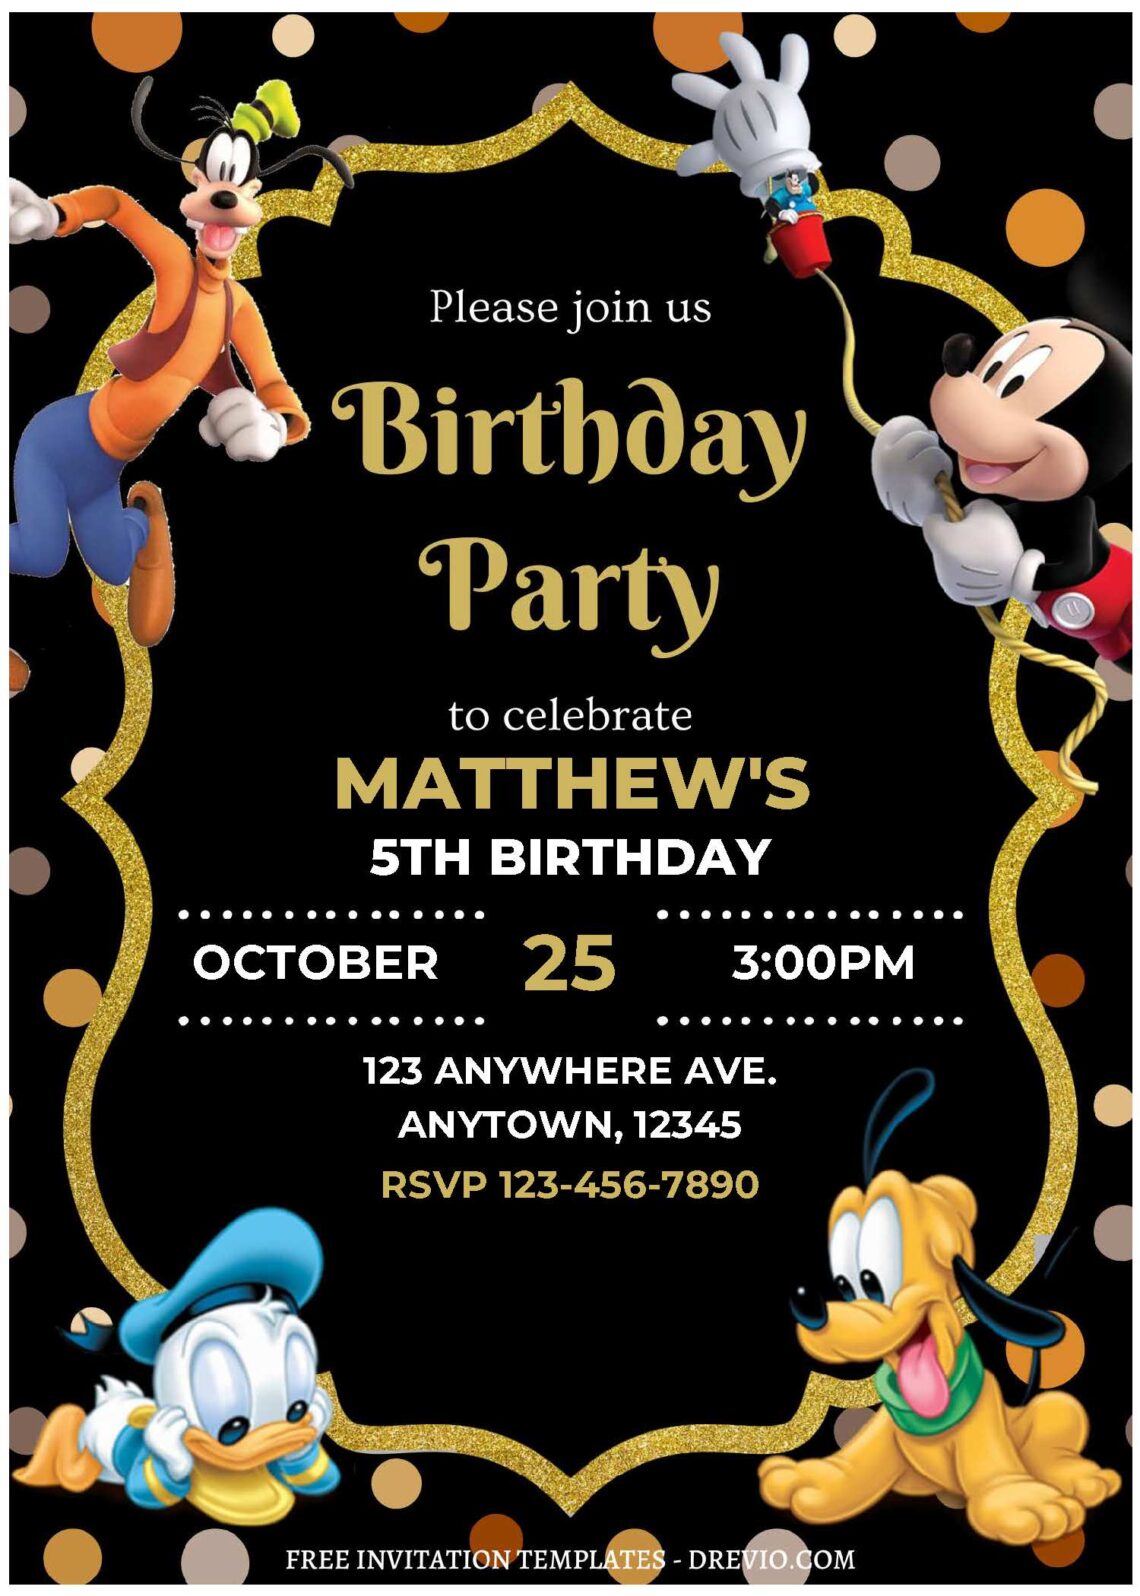 (Free Editable PDF) Mickey Mouse Magical World Birthday Invitation Templates with charming black background